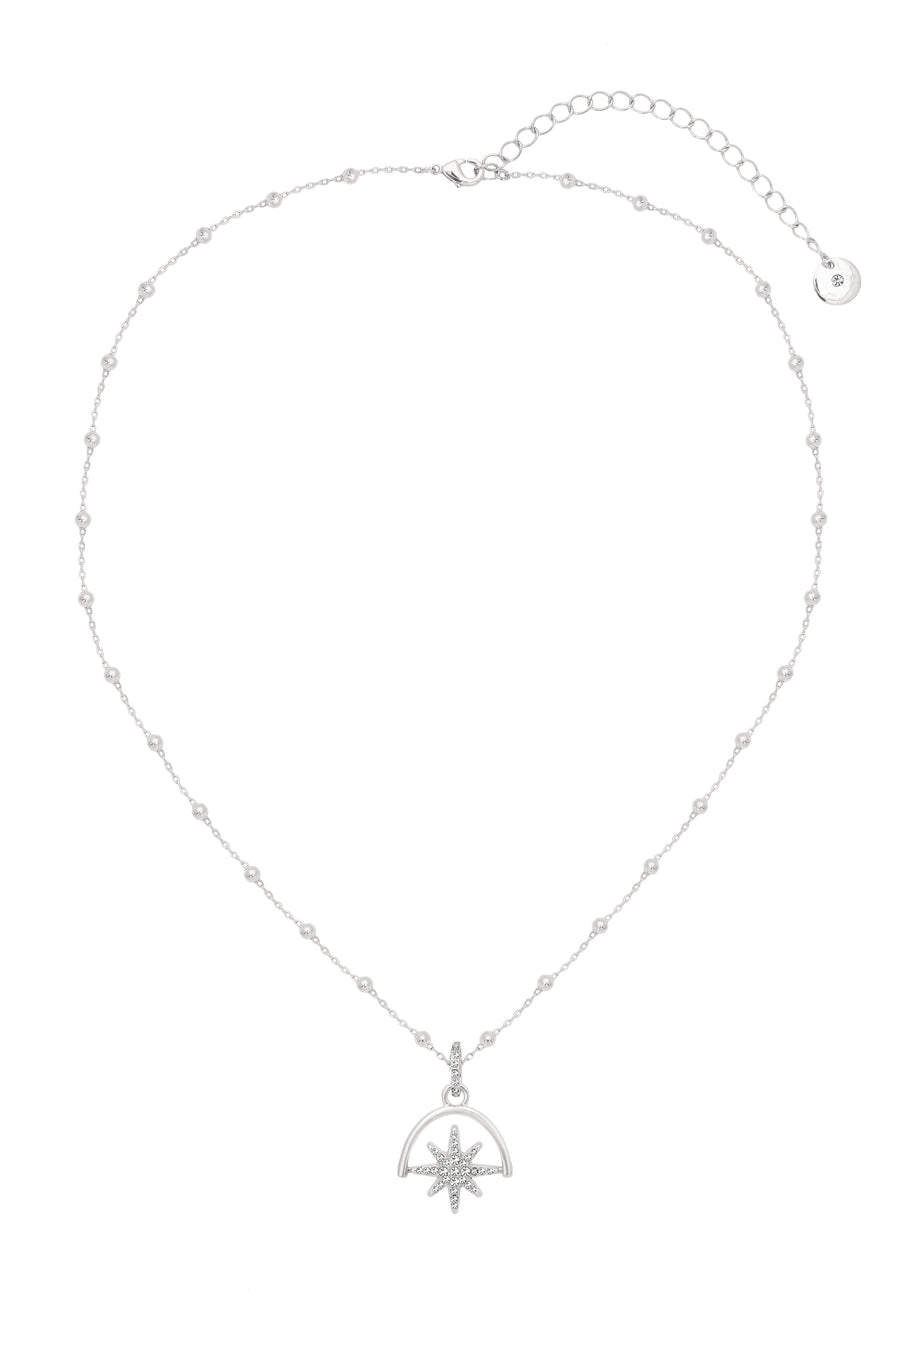 Silver 'Spinning Star' Charm Necklace